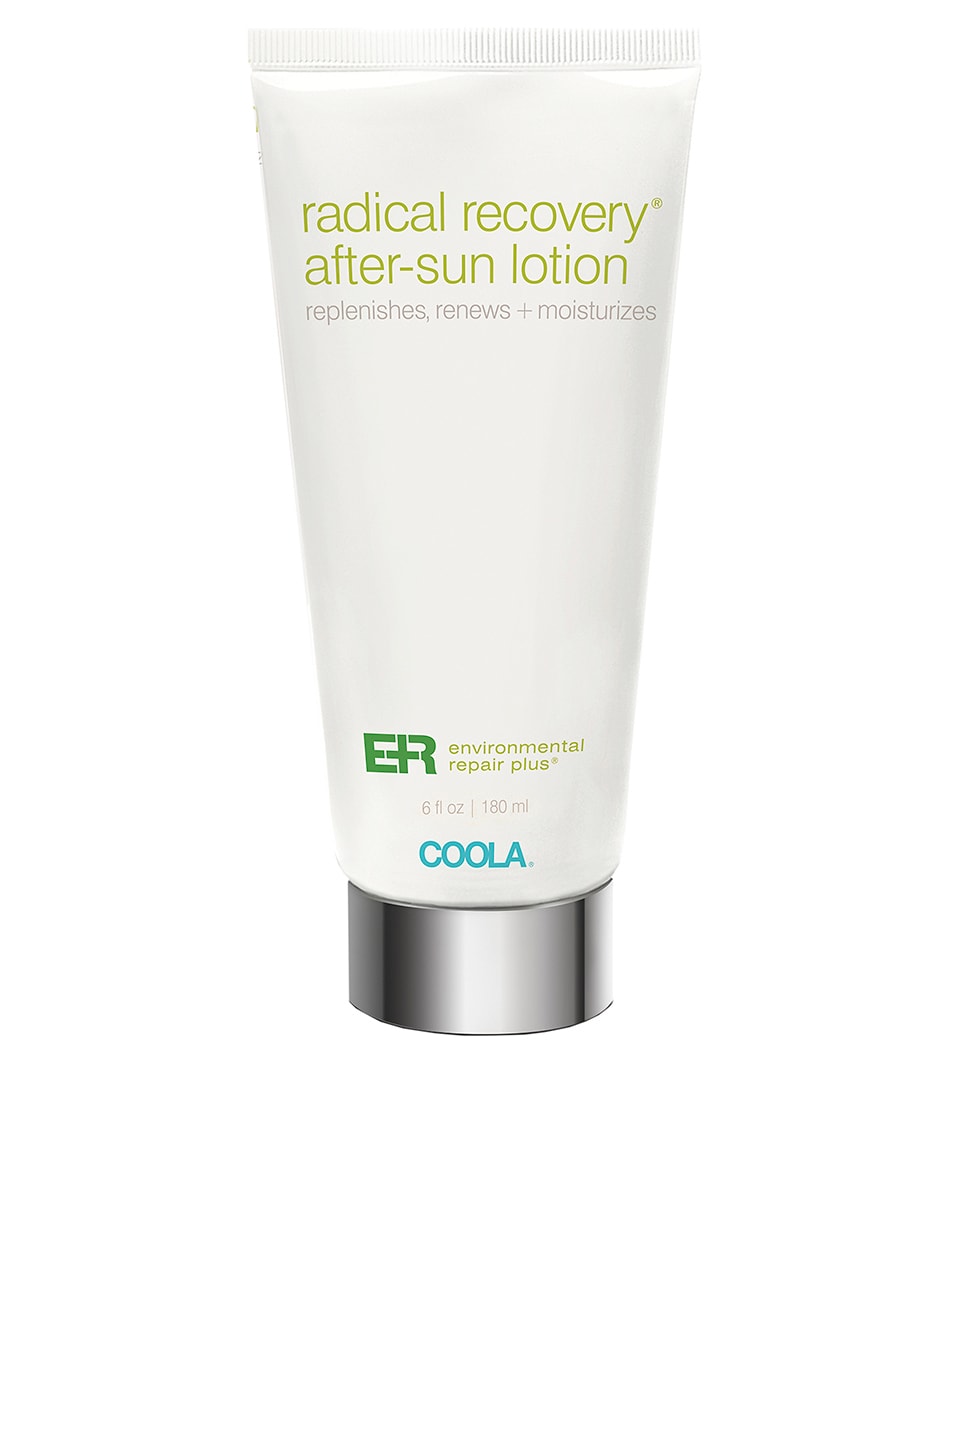 COOLA ER+ RADICAL RECOVERY AFTER-SUN LOTION